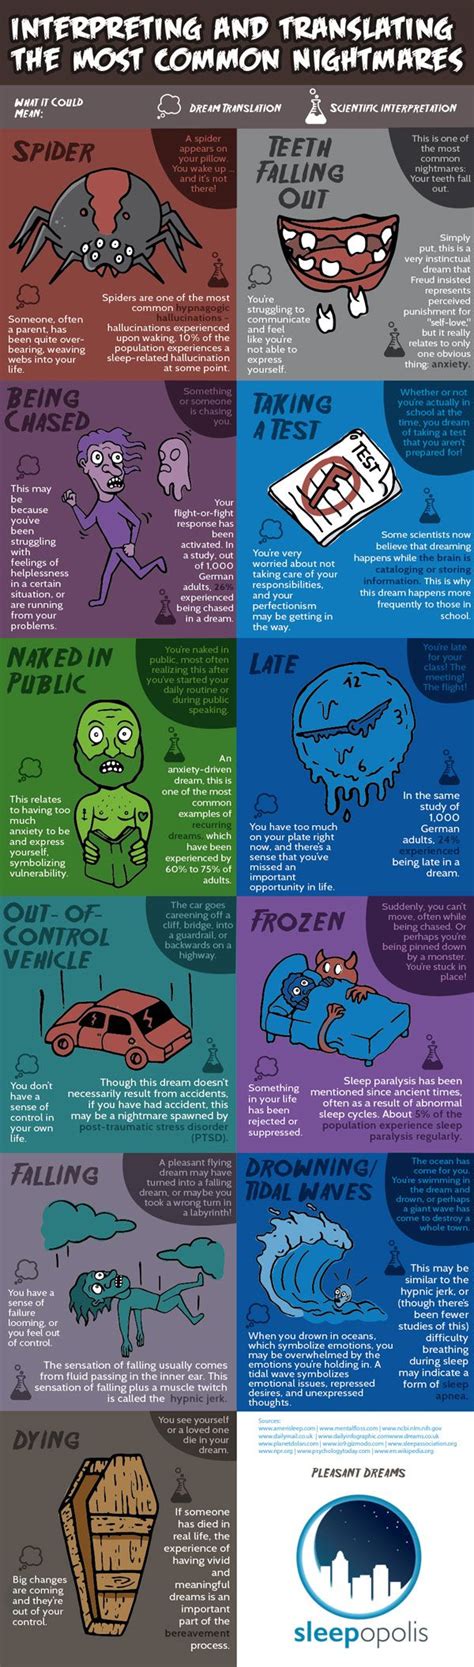 Interpreting The Most Common Nightmares Infographic Infographic